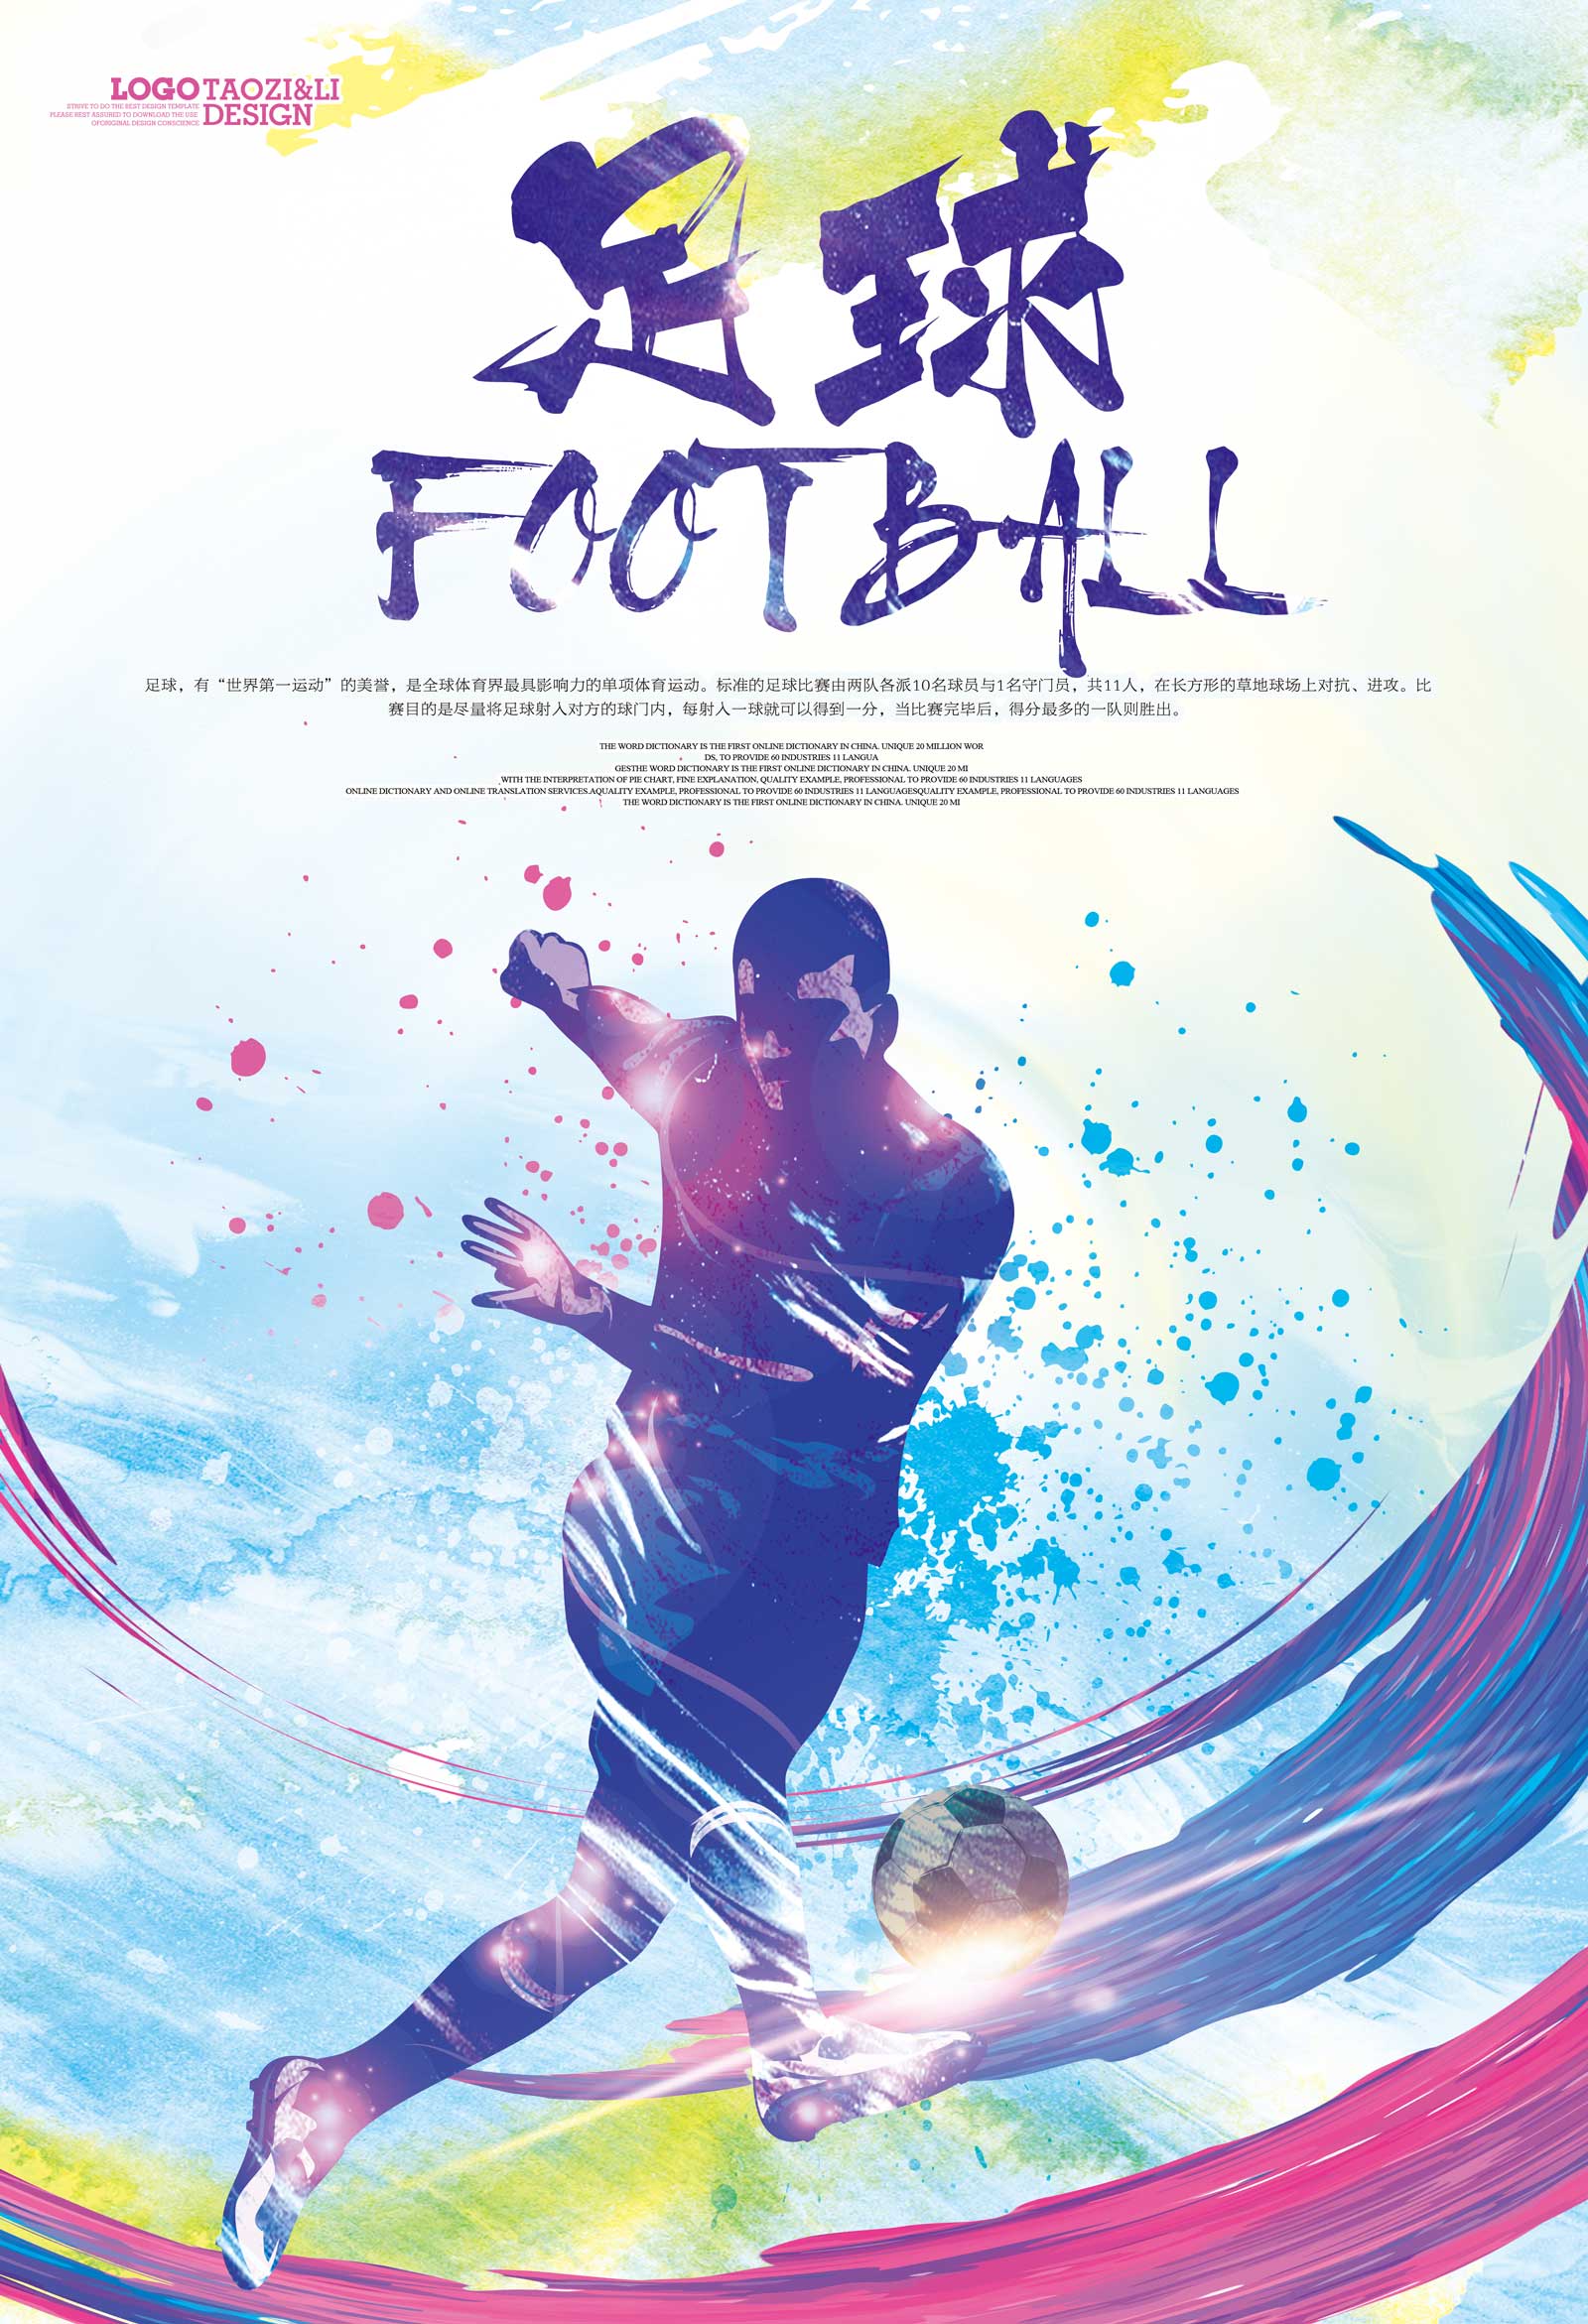 Chinese football poster design - PSD File Free Download